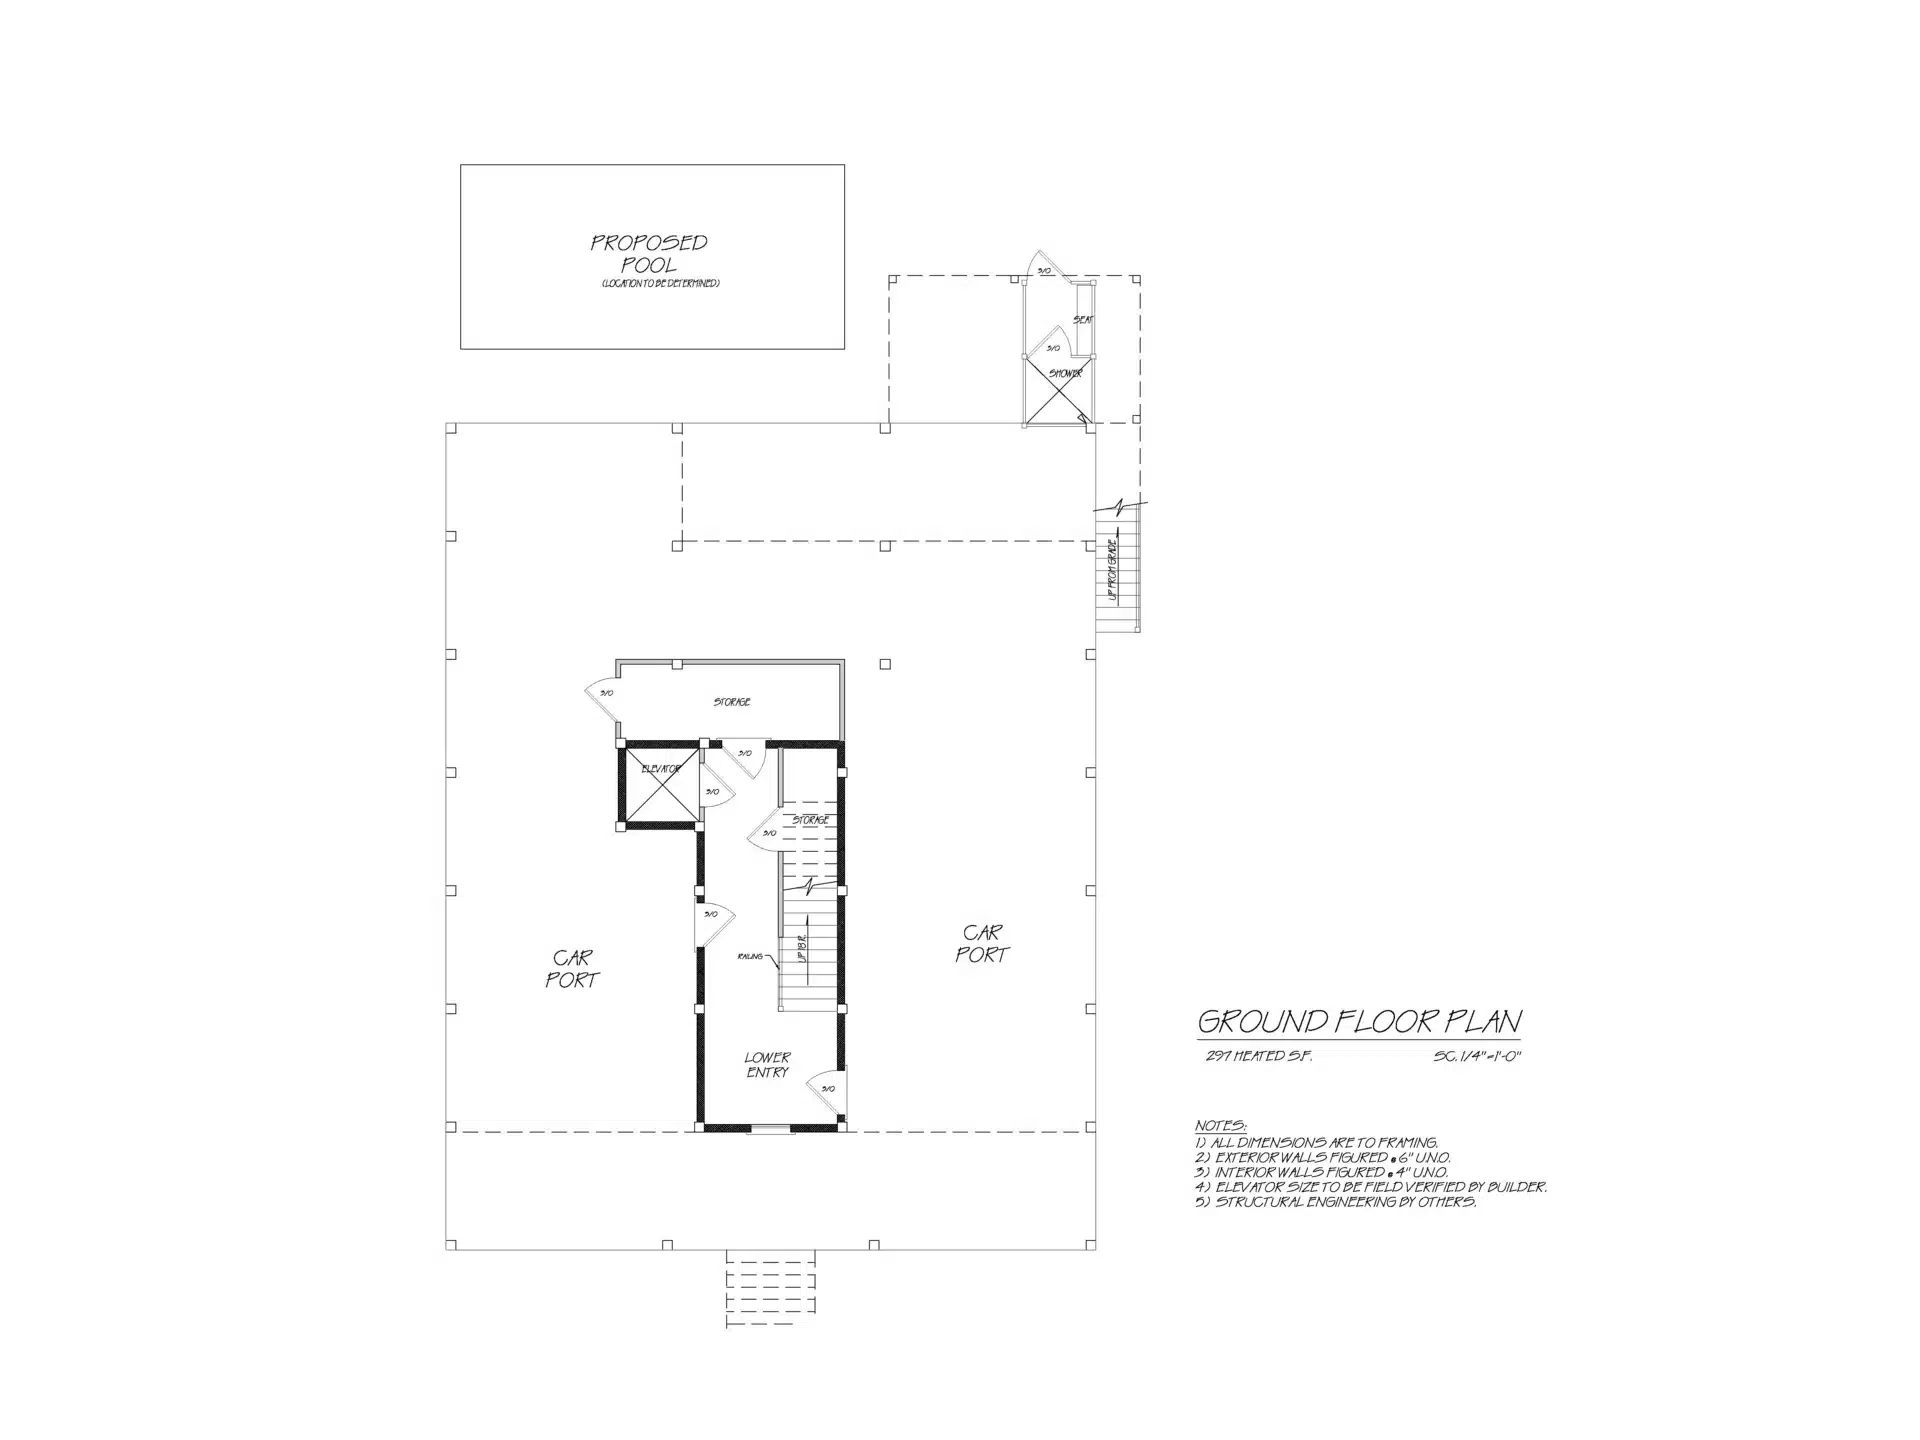 20-1520 my home floor plans_Page_06